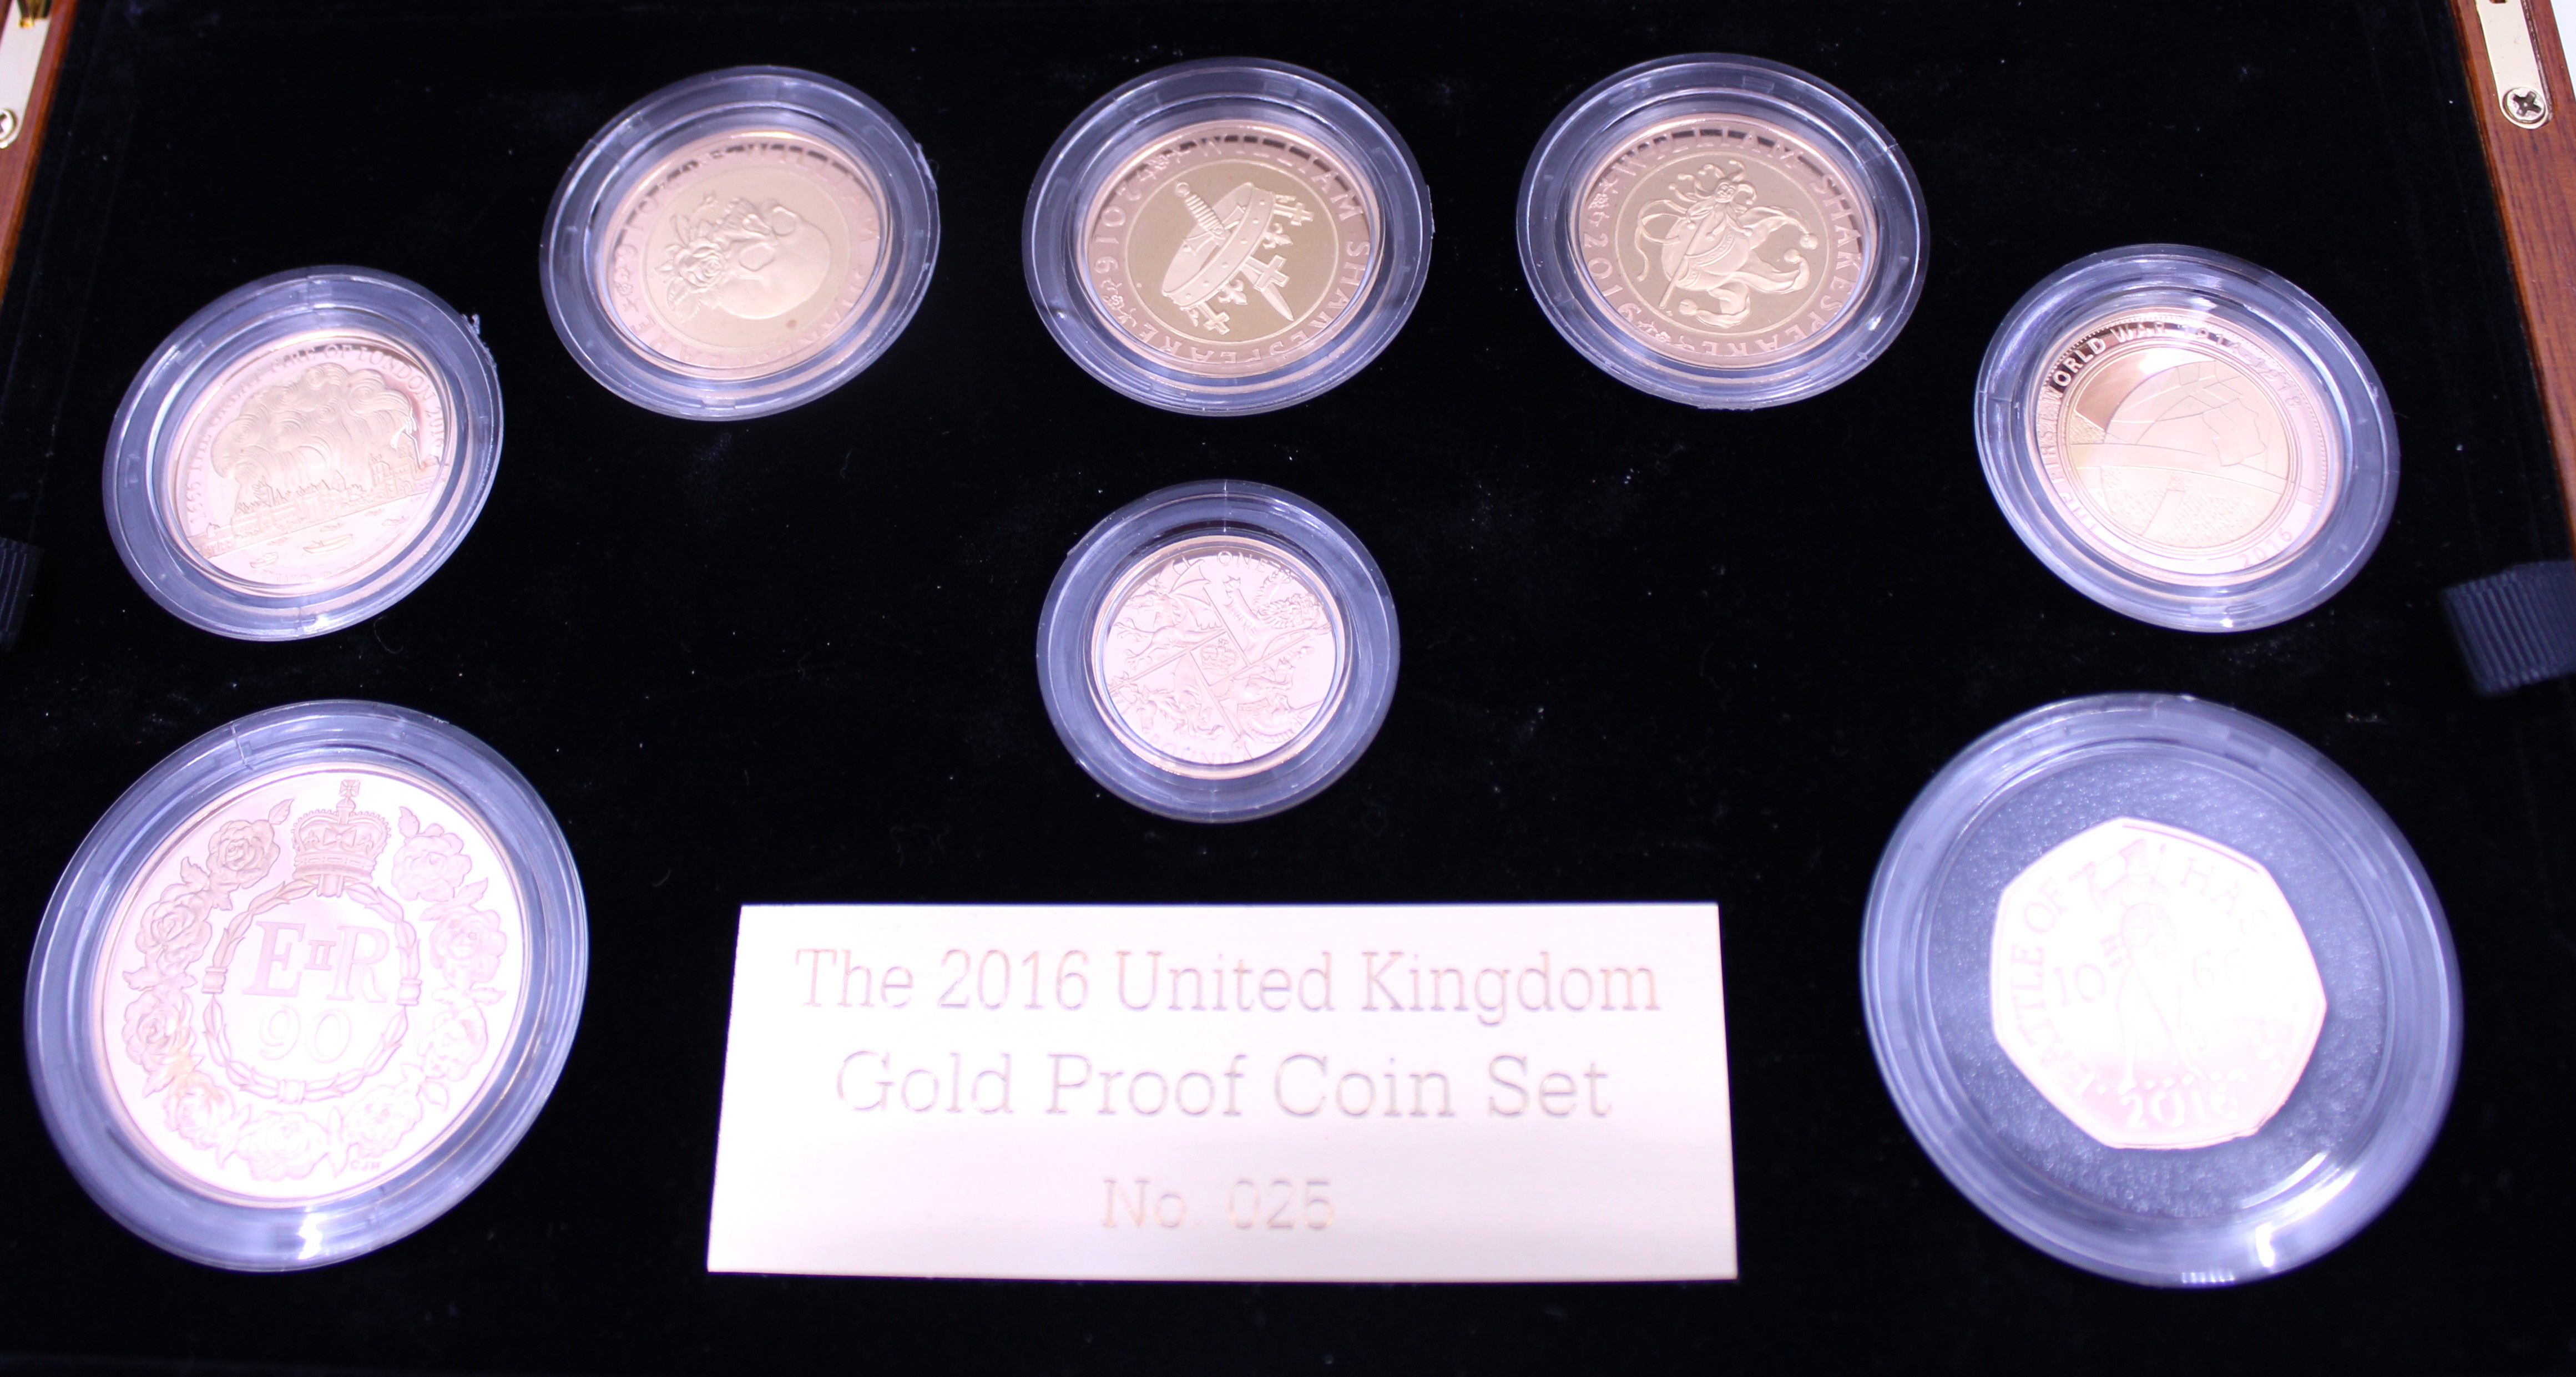 2016 UK Gold Proof Annual Set from The Royal Mint with eight commemorative coins in original box. - Image 2 of 5